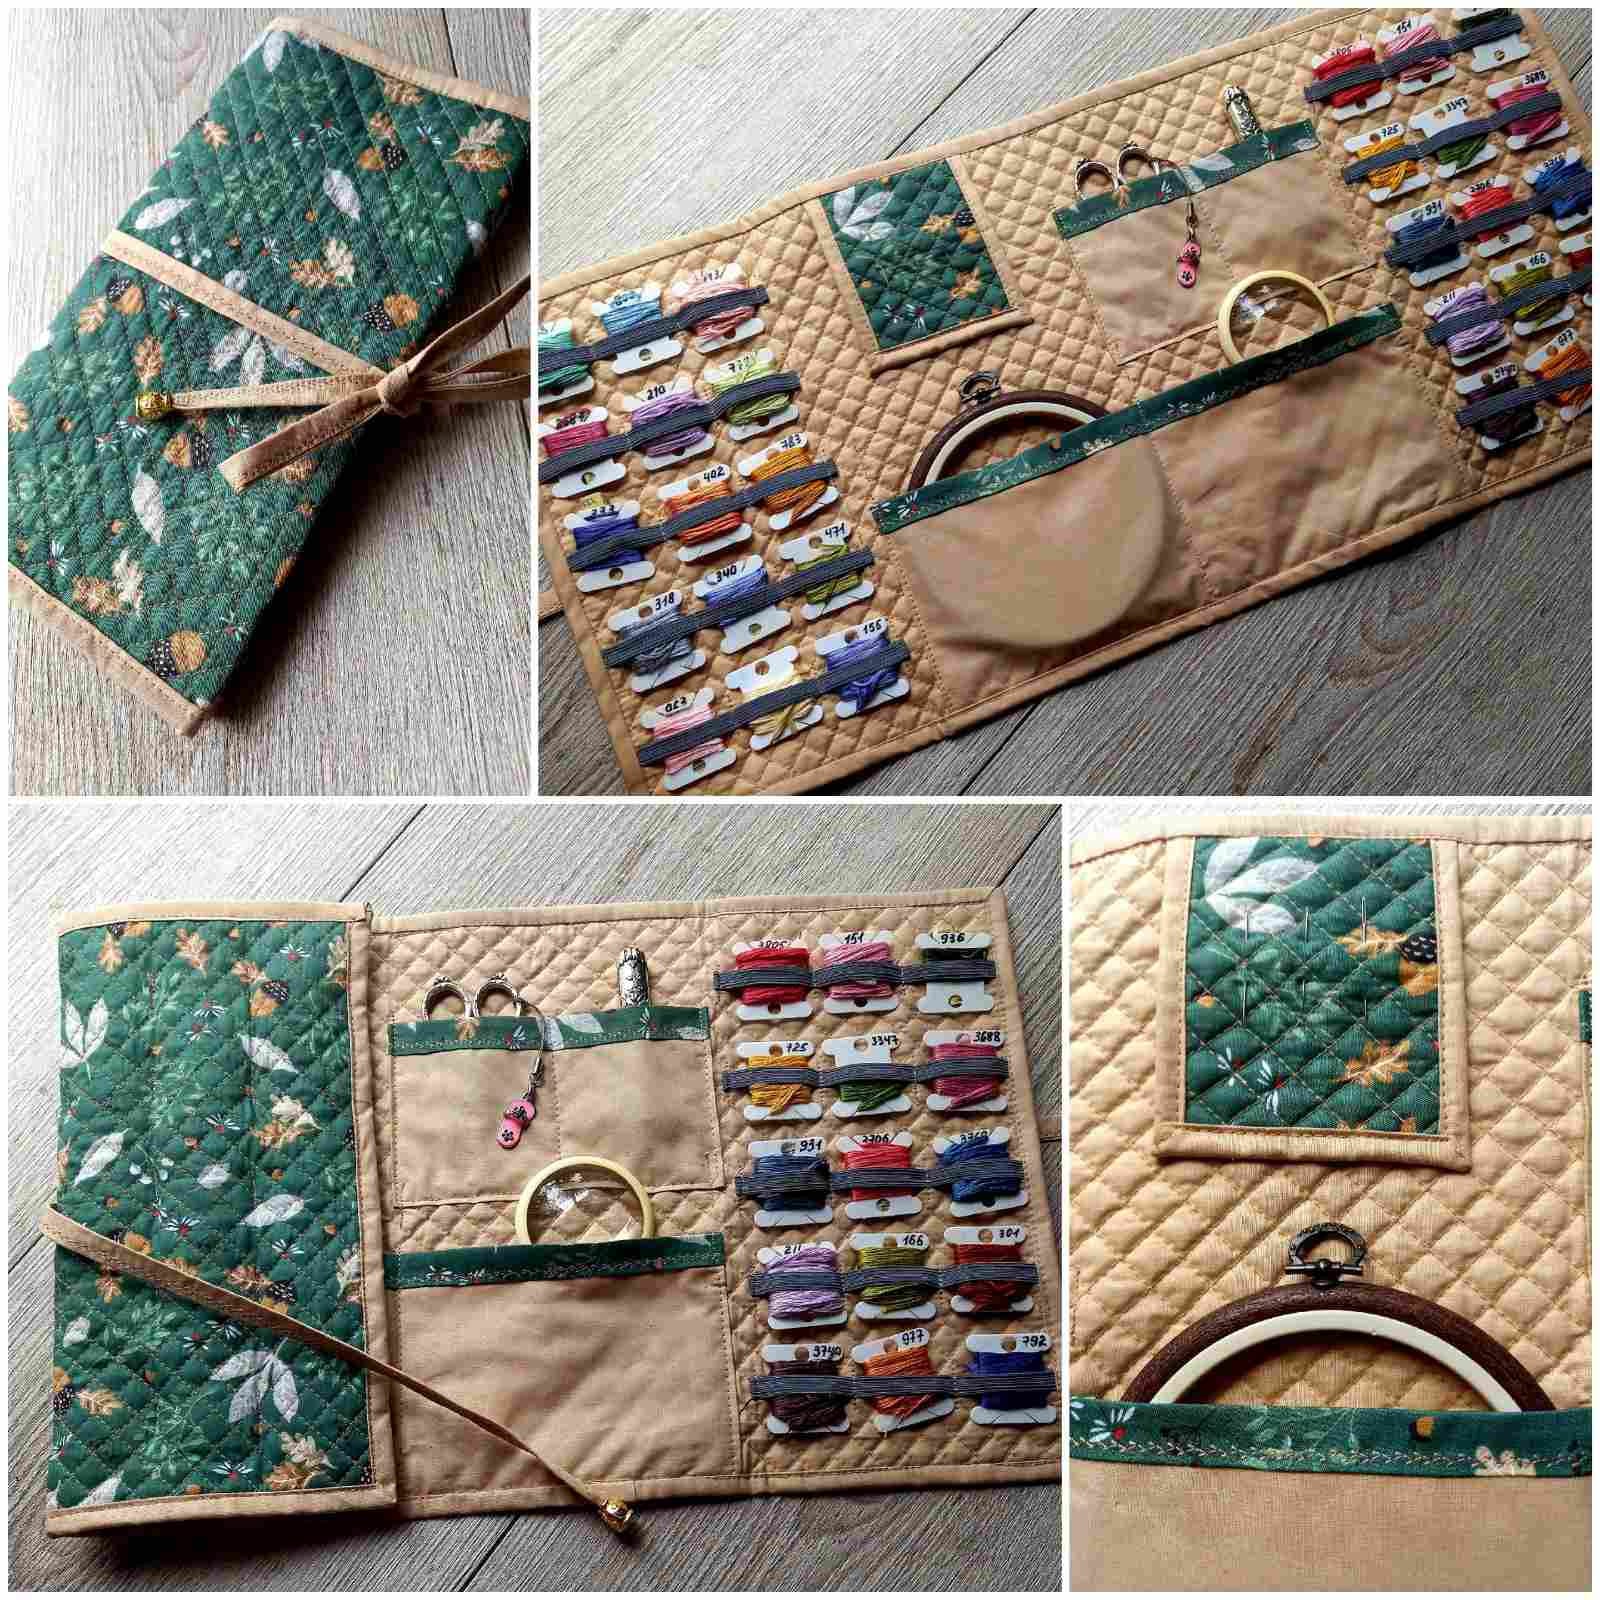 16 Embroidery Project Bag Cross Stitch Sewing Kit Case Storage